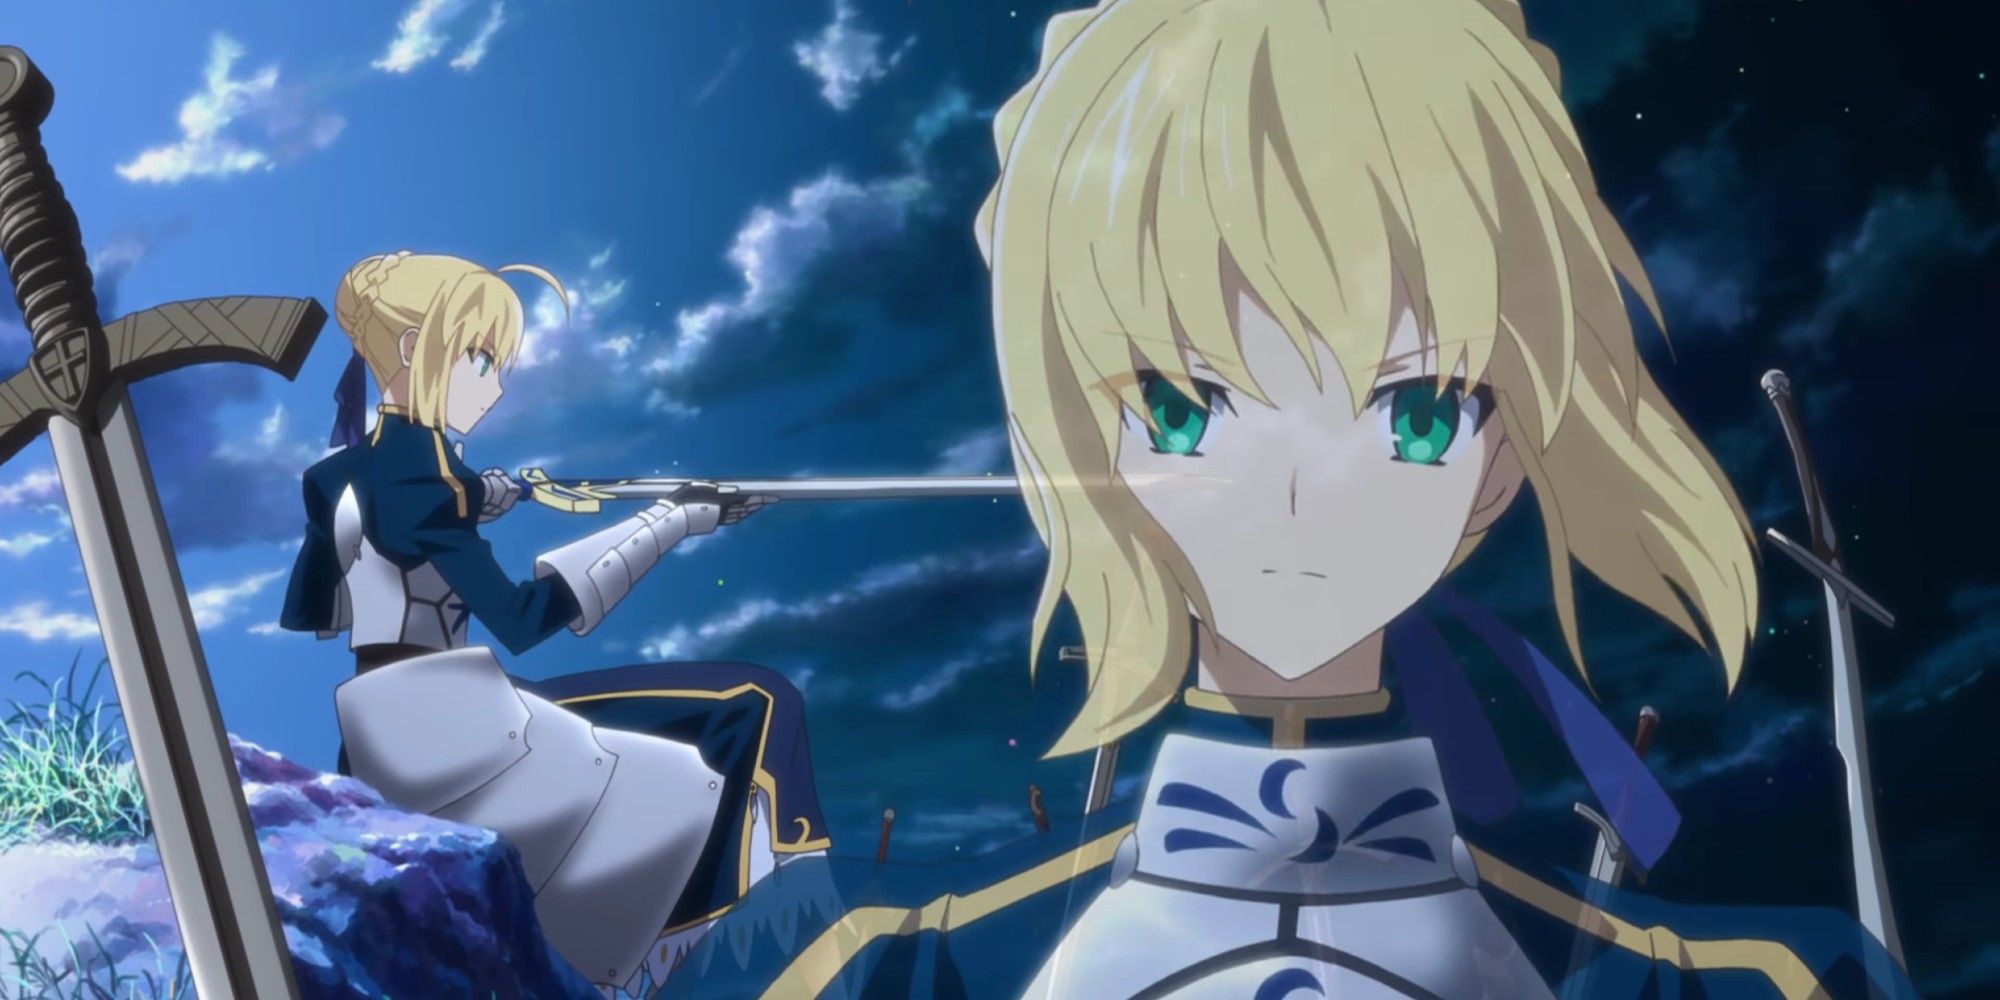 The Servant known as Saber sits on a rock and examines his sword as a larger picture of their faces is superimposed on the screen.